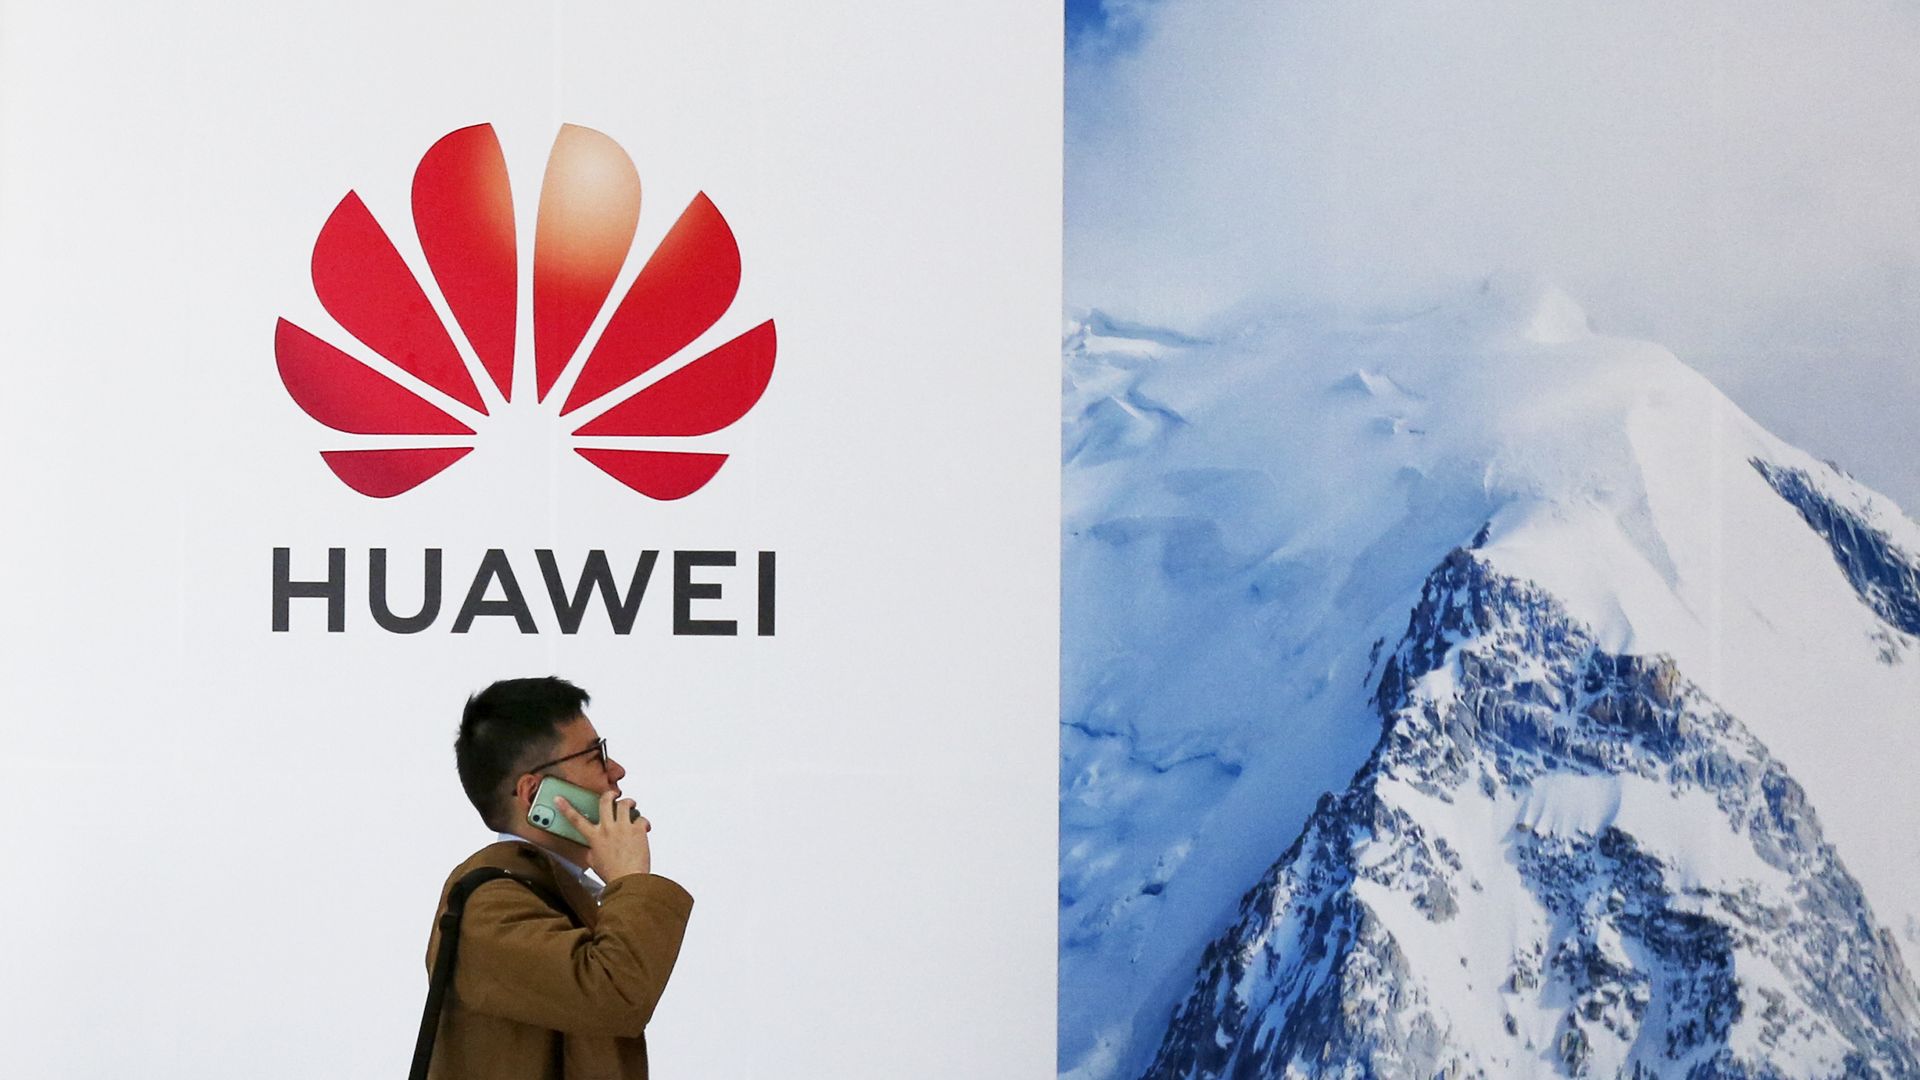 A man walks in front of a wall with the Huawei logo